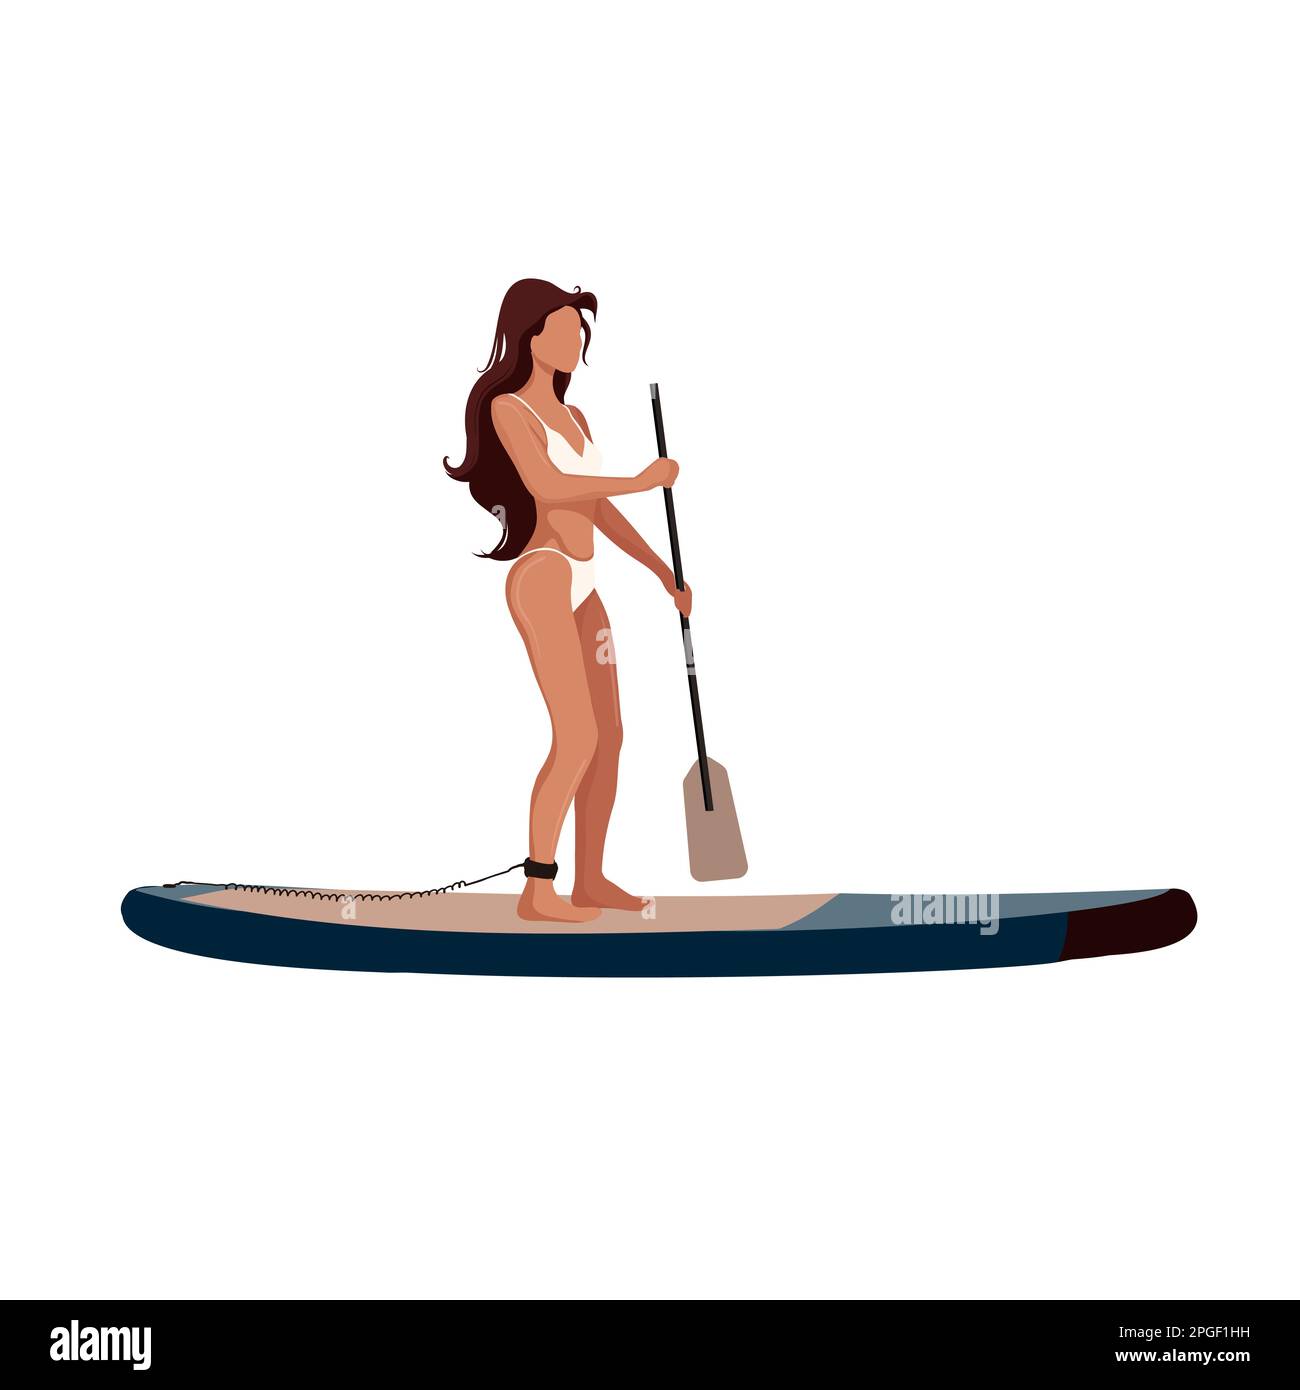 Cartoon Woman stand on SUP board with paddle Stock Vector